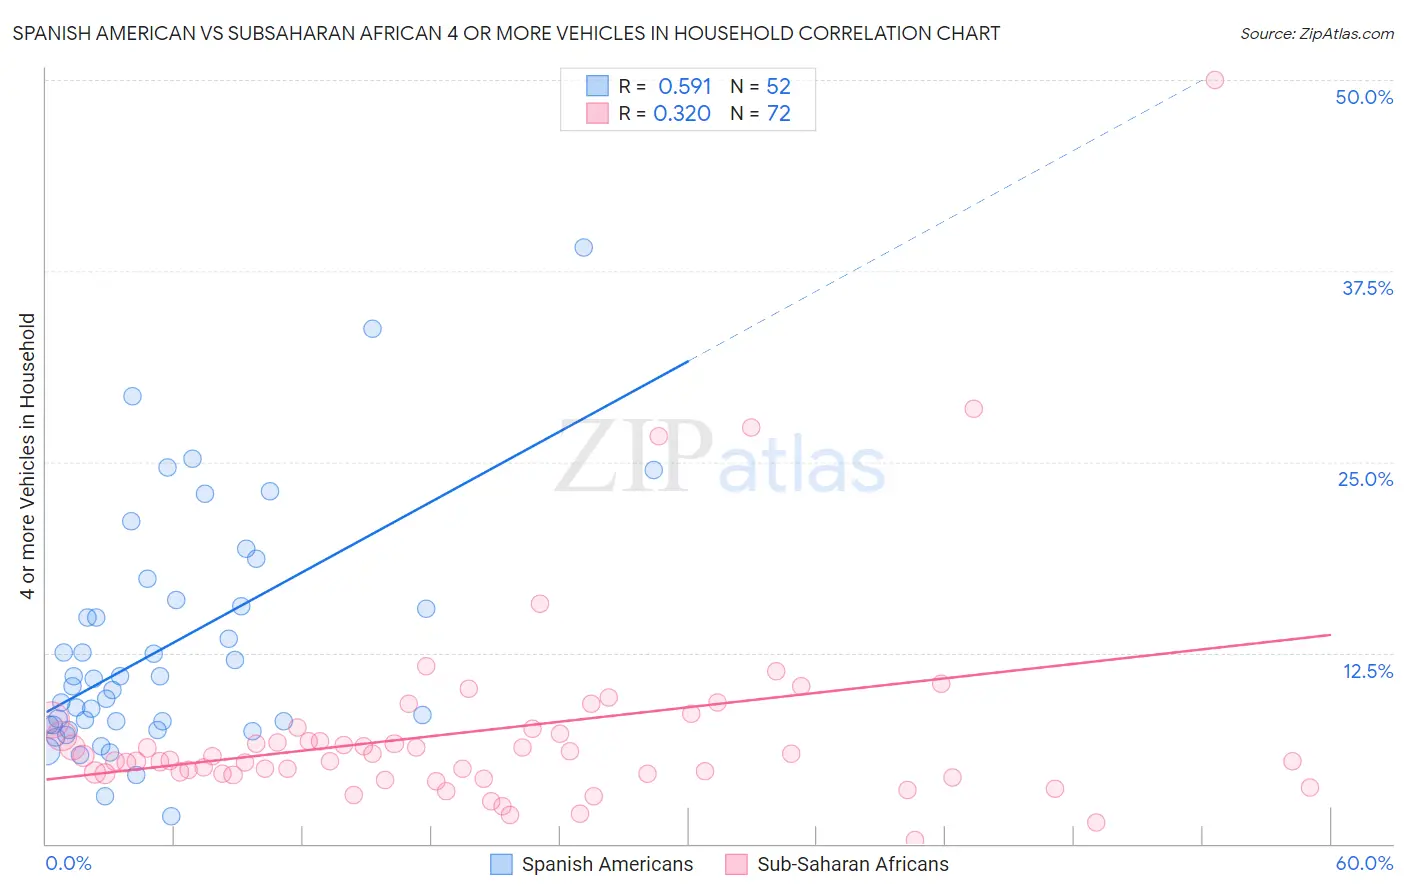 Spanish American vs Subsaharan African 4 or more Vehicles in Household